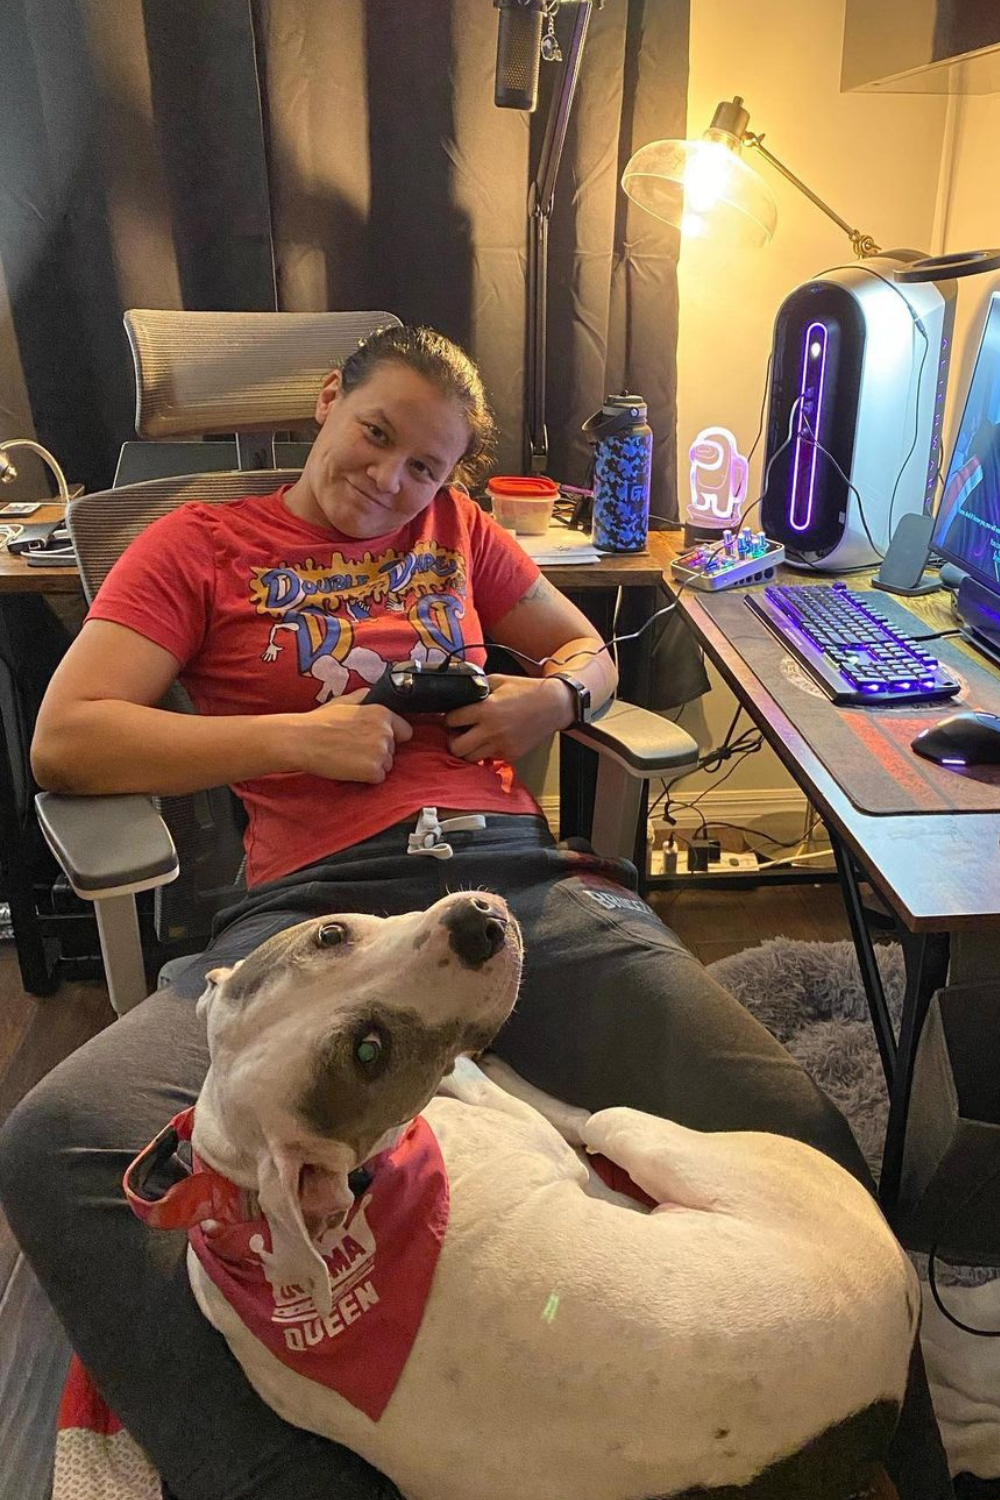 Shayna Baszler Playing Video Games And Her Dog